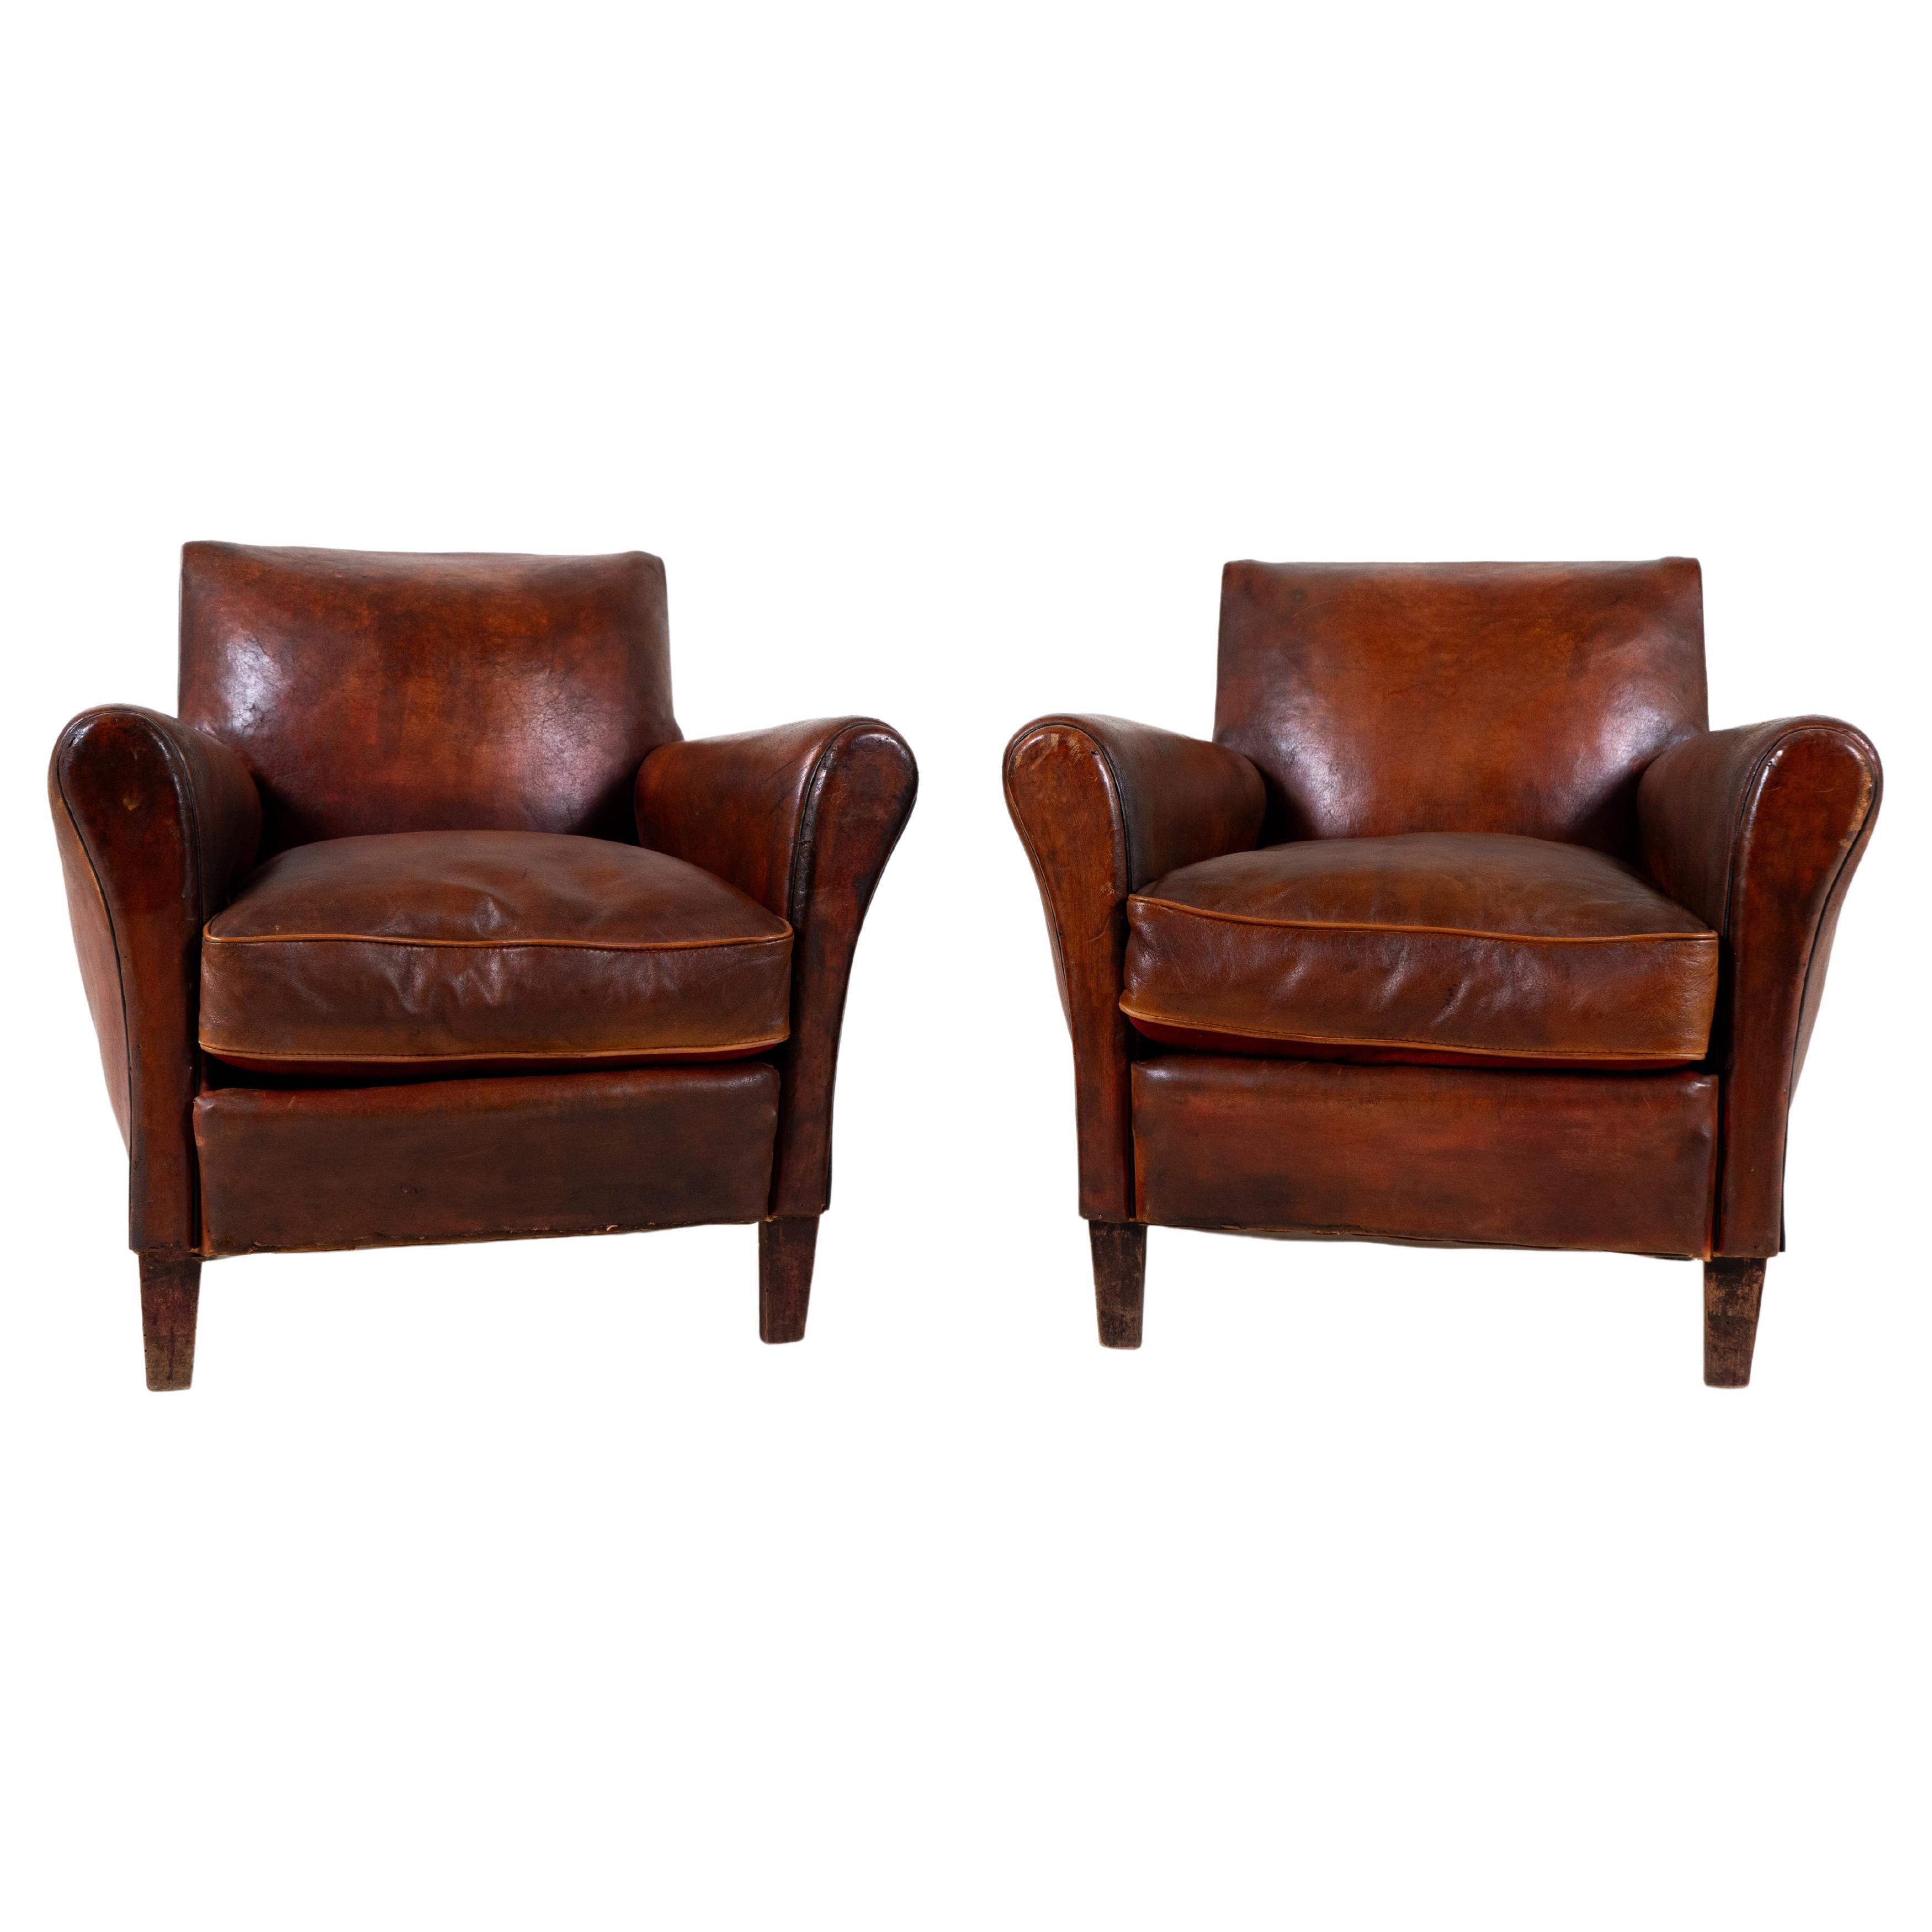 A Vintage Pair of Leather Club Chairs, France 1940 For Sale